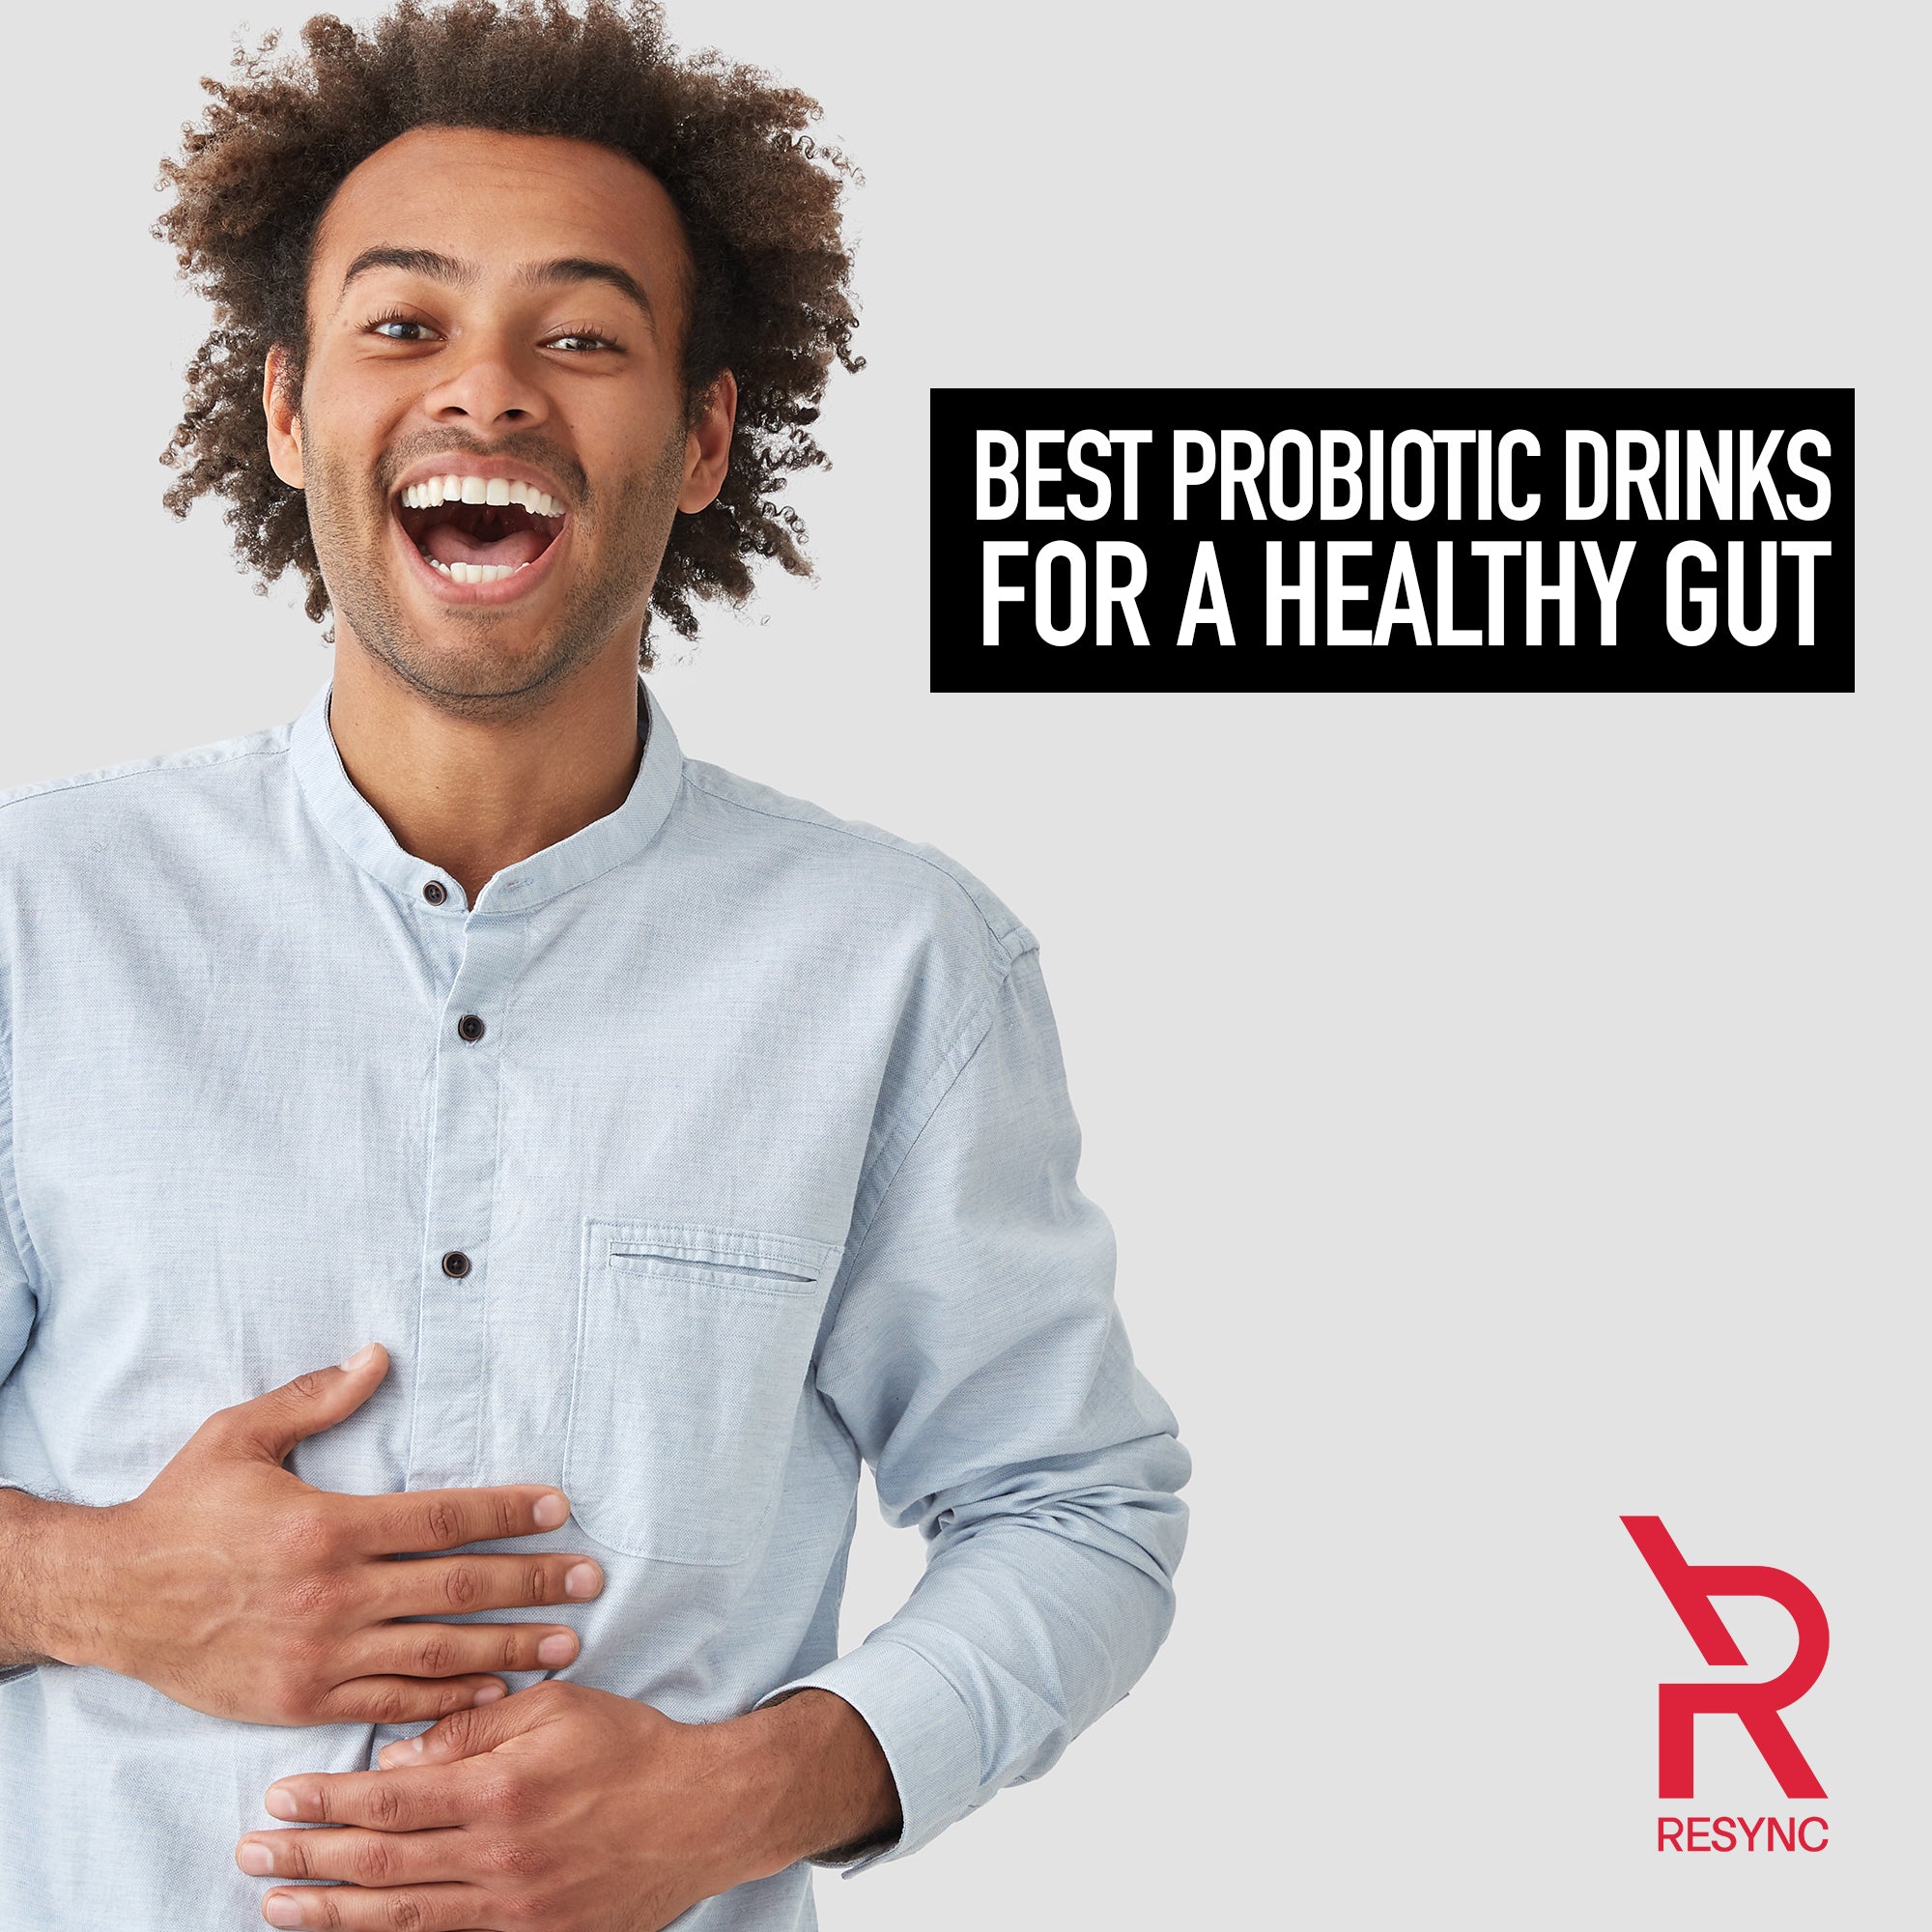 Best Probiotic Drinks For A Healthy Gut